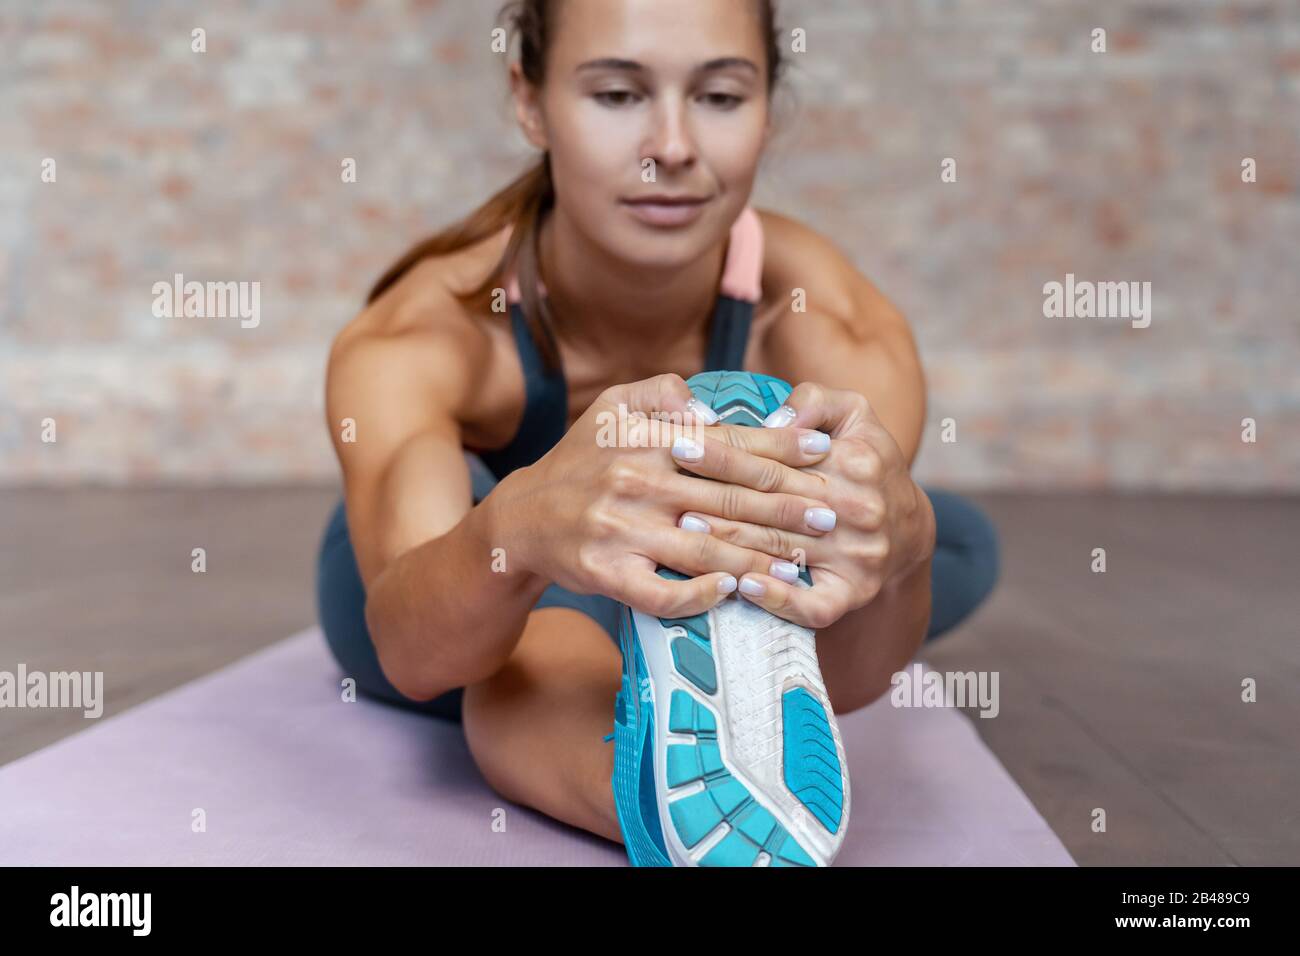 Sporty young woman fitness coach warm up stretch leg on mat. Stock Photo